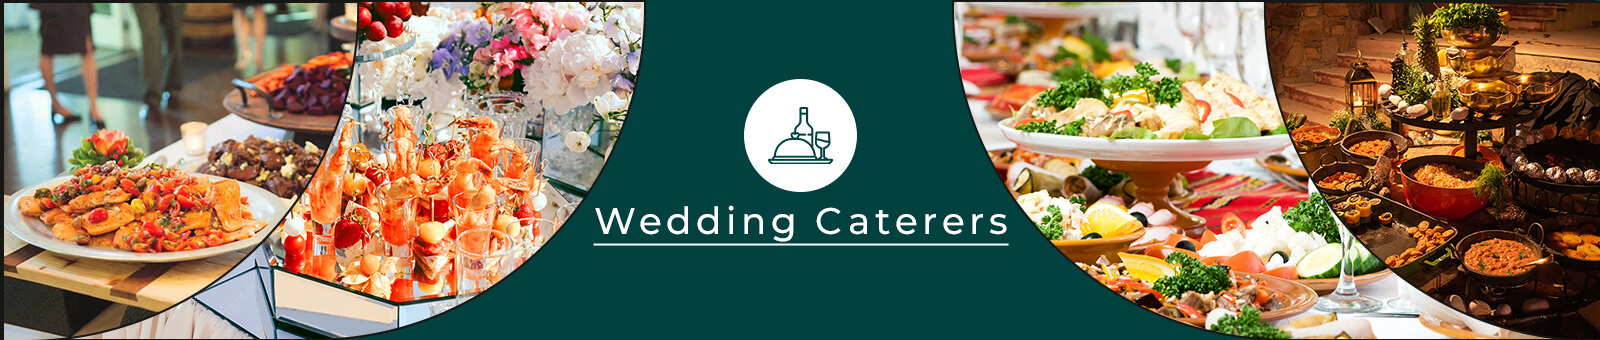 Best Wedding Caterers in Chennai